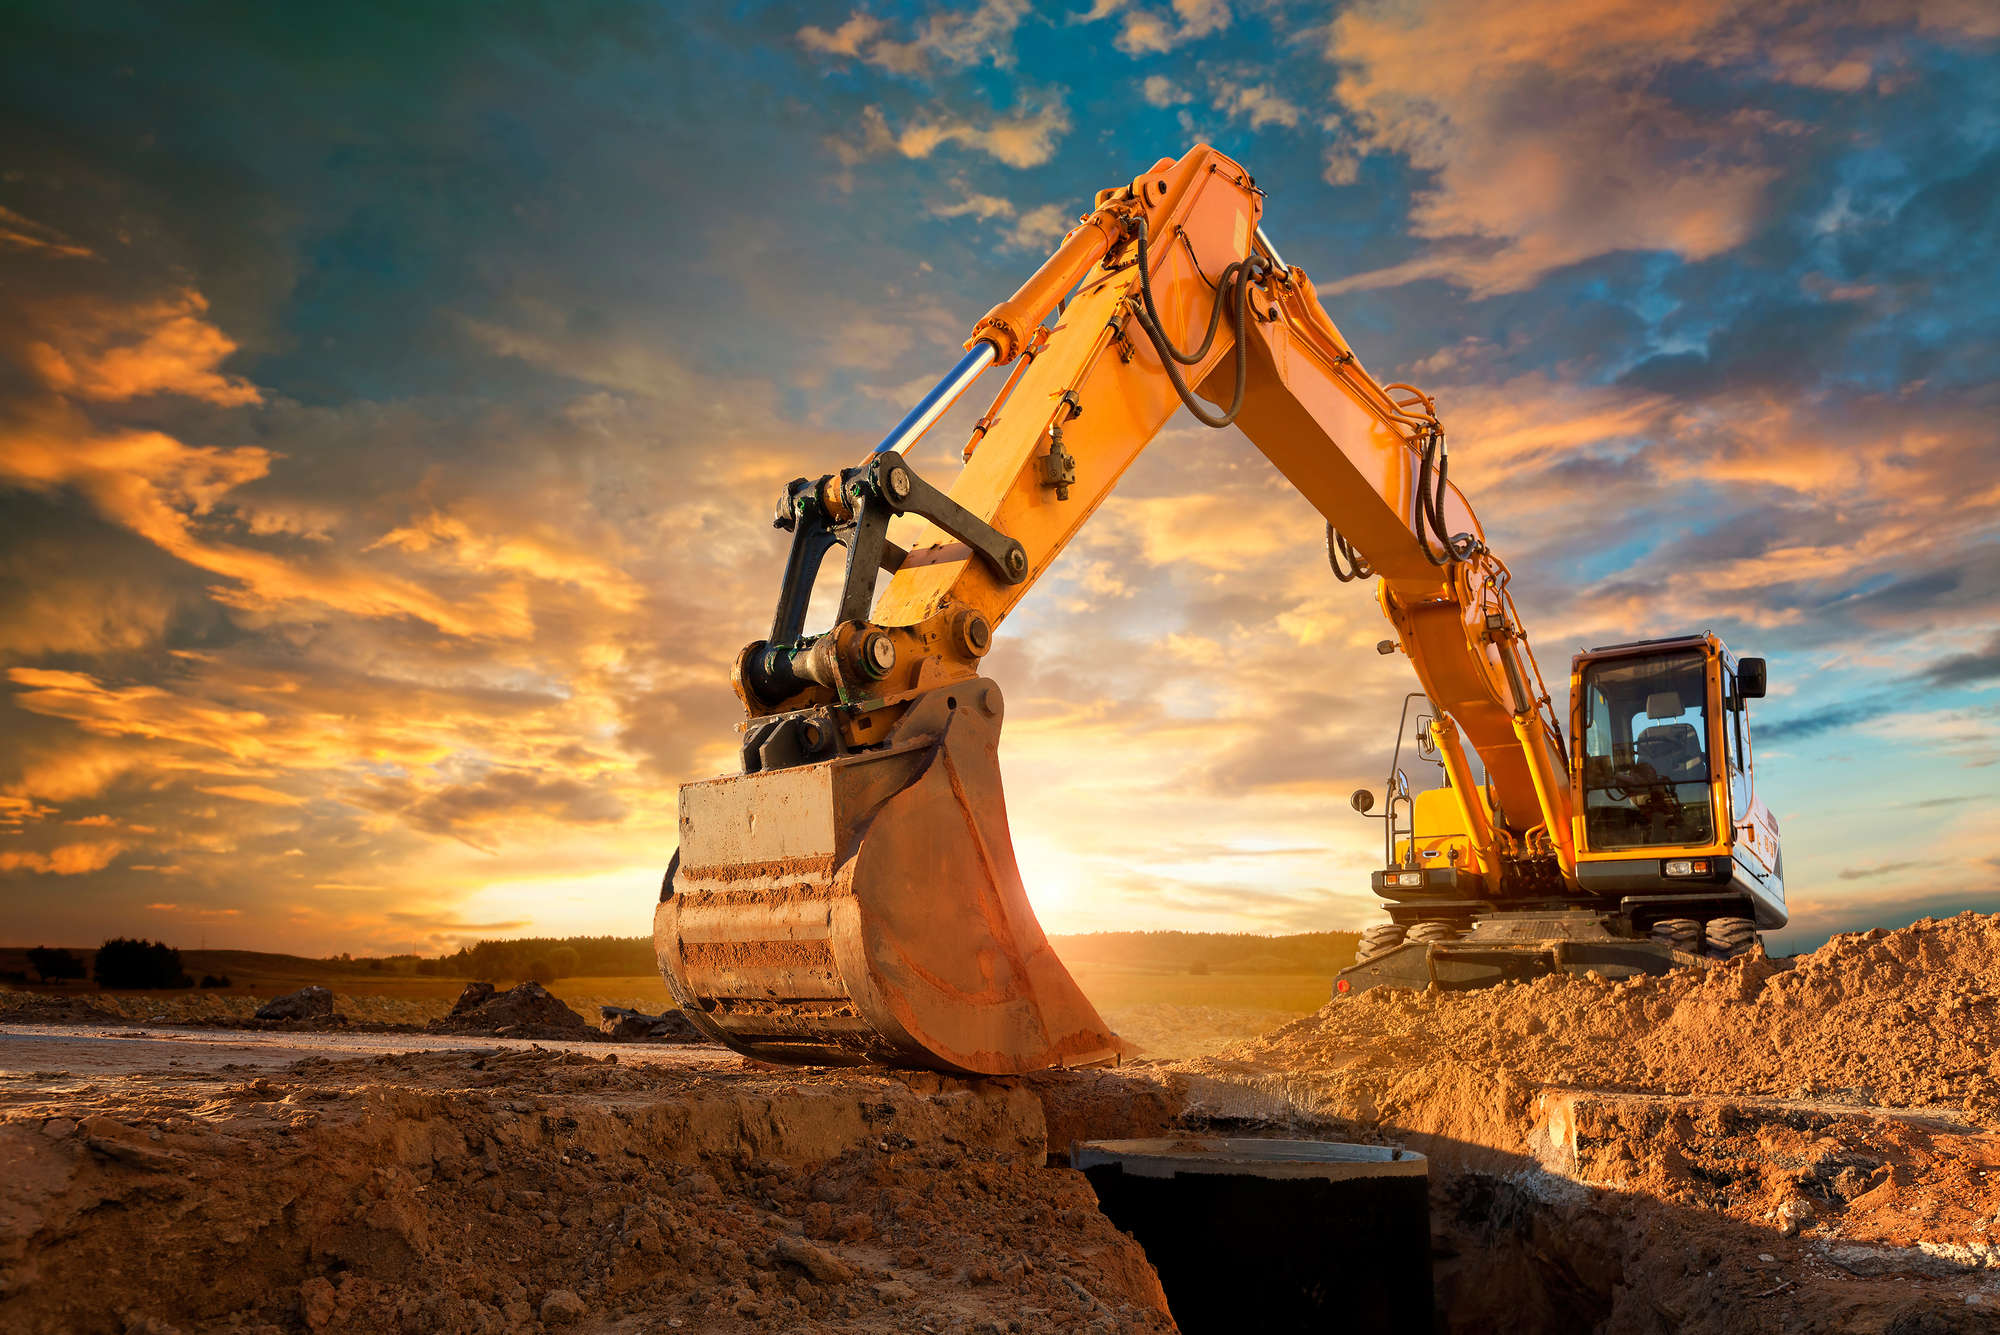             Construction sites photo wallpaper excavator at sunset on mother of pearl smooth fleece
        